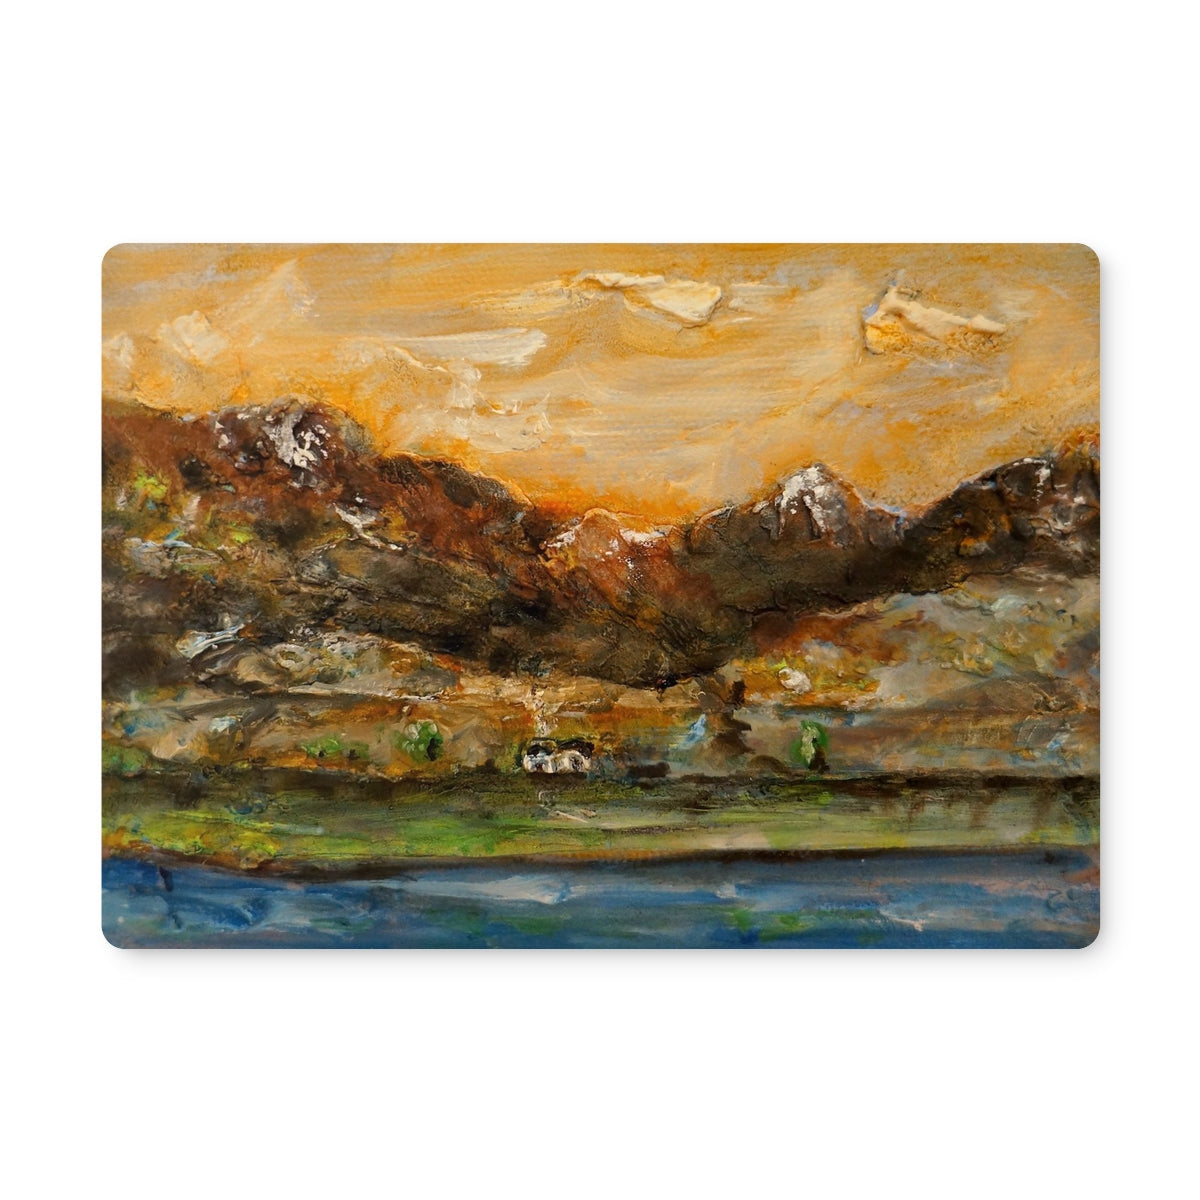 A Glencoe Cottage Art Gifts Placemat-Placemats-Glencoe Art Gallery-2 Placemats-Paintings, Prints, Homeware, Art Gifts From Scotland By Scottish Artist Kevin Hunter